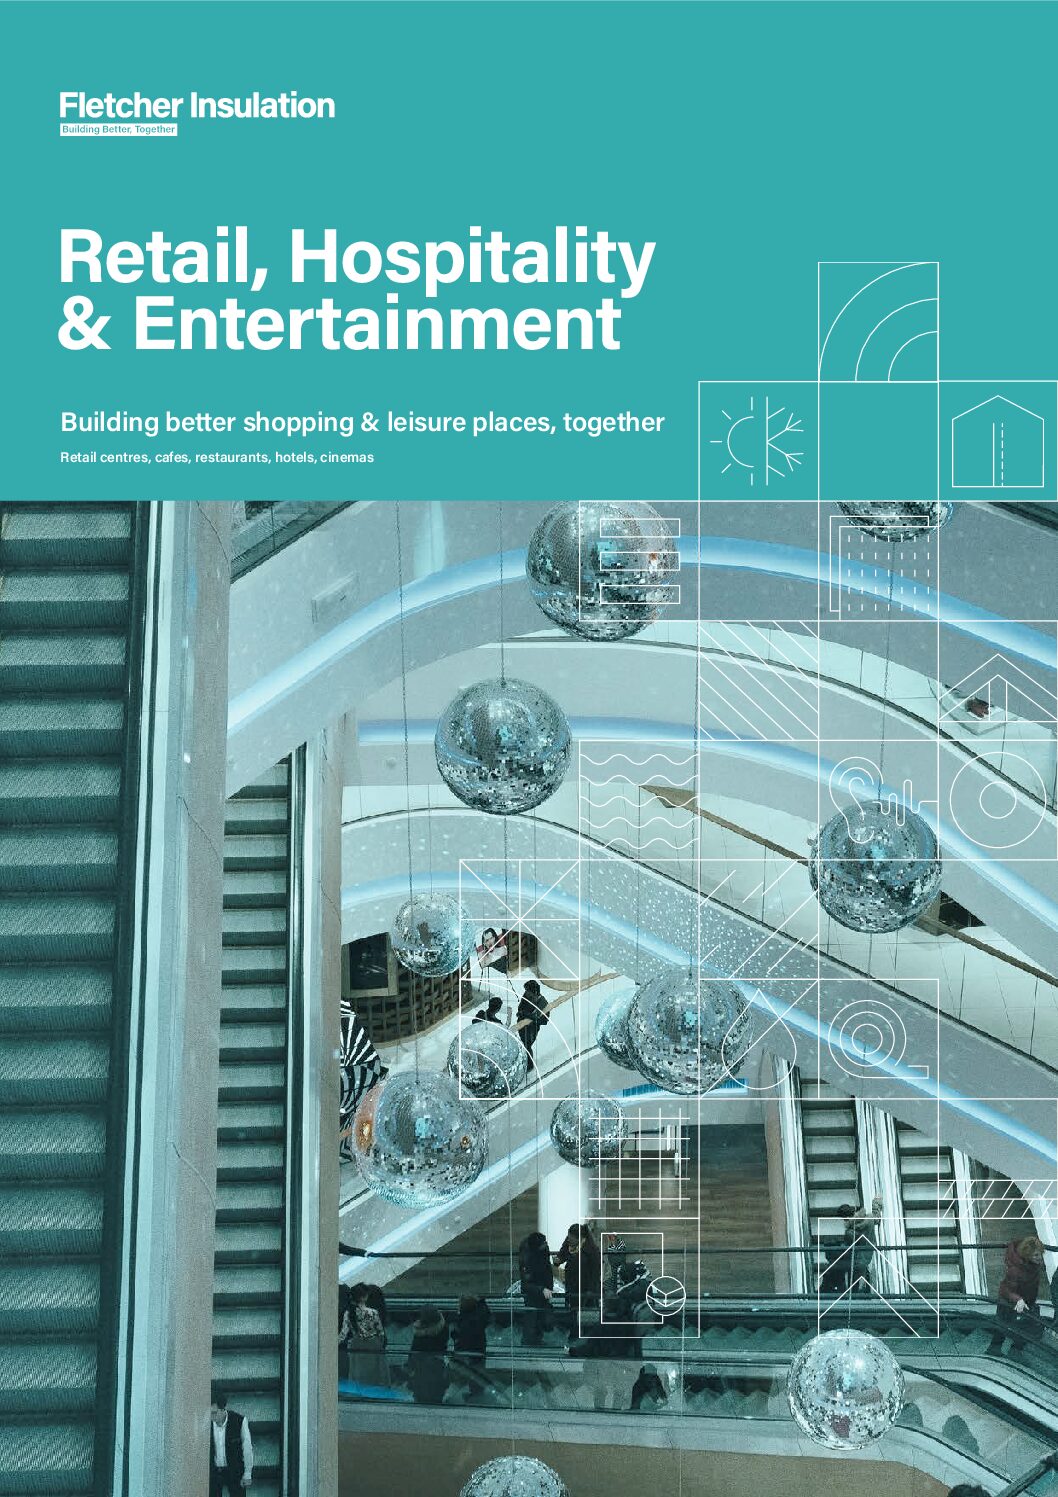 Retail Hospitality & Entertainment – Building Better Shopping & Leisure Places